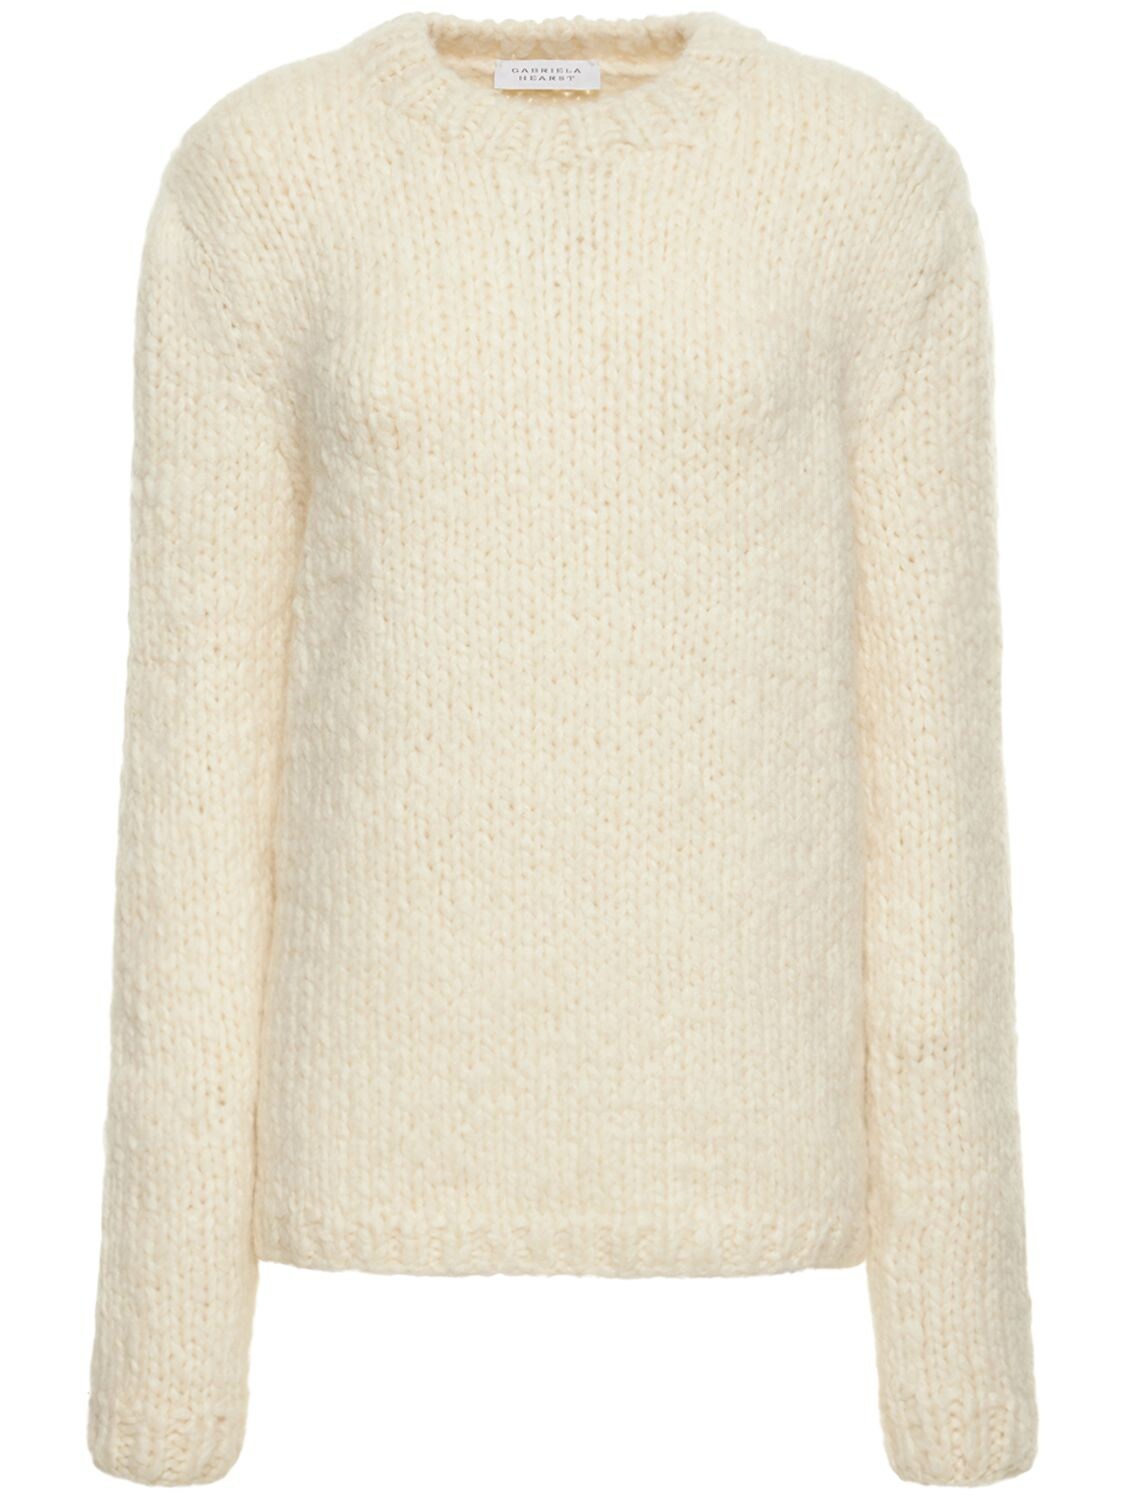 Gabriela Hearst Lawrence Cashmere Sweater In Ivory